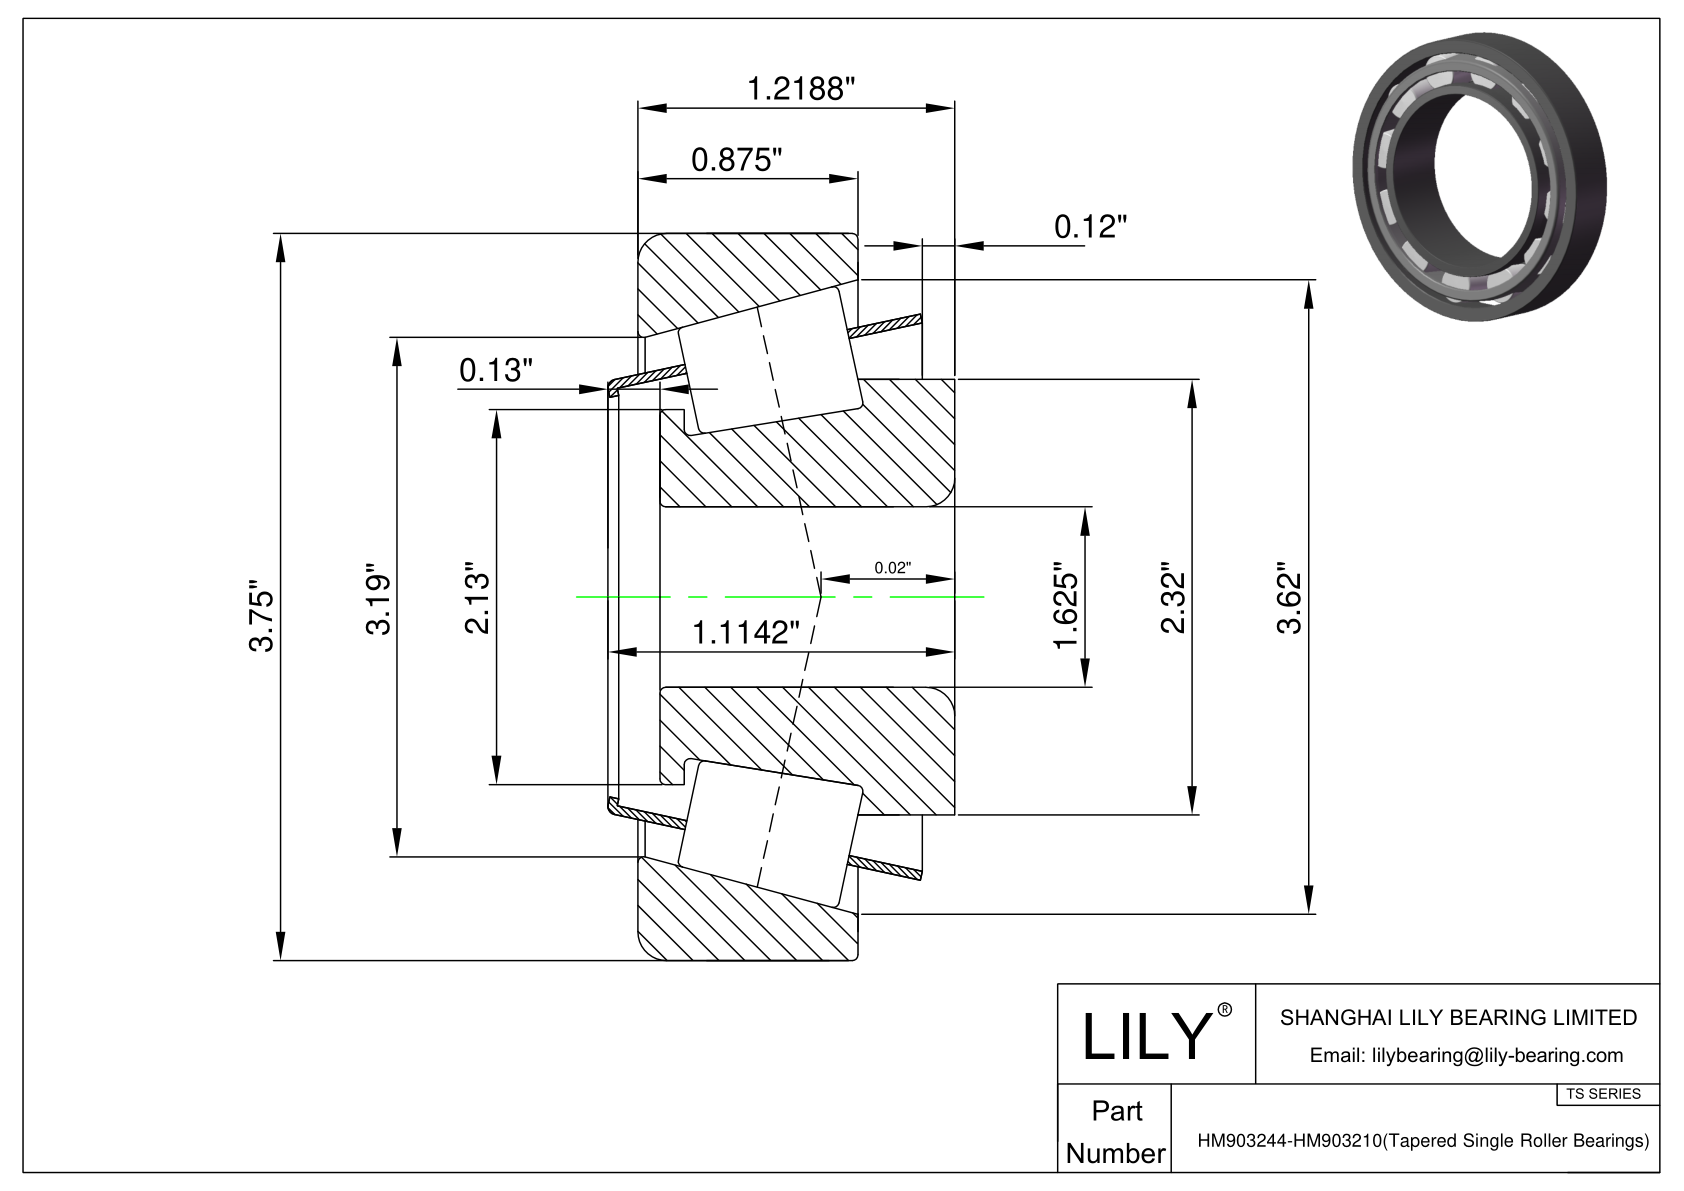 HM903244-HM903210 TS (Tapered Single Roller Bearings) (Imperial) cad drawing